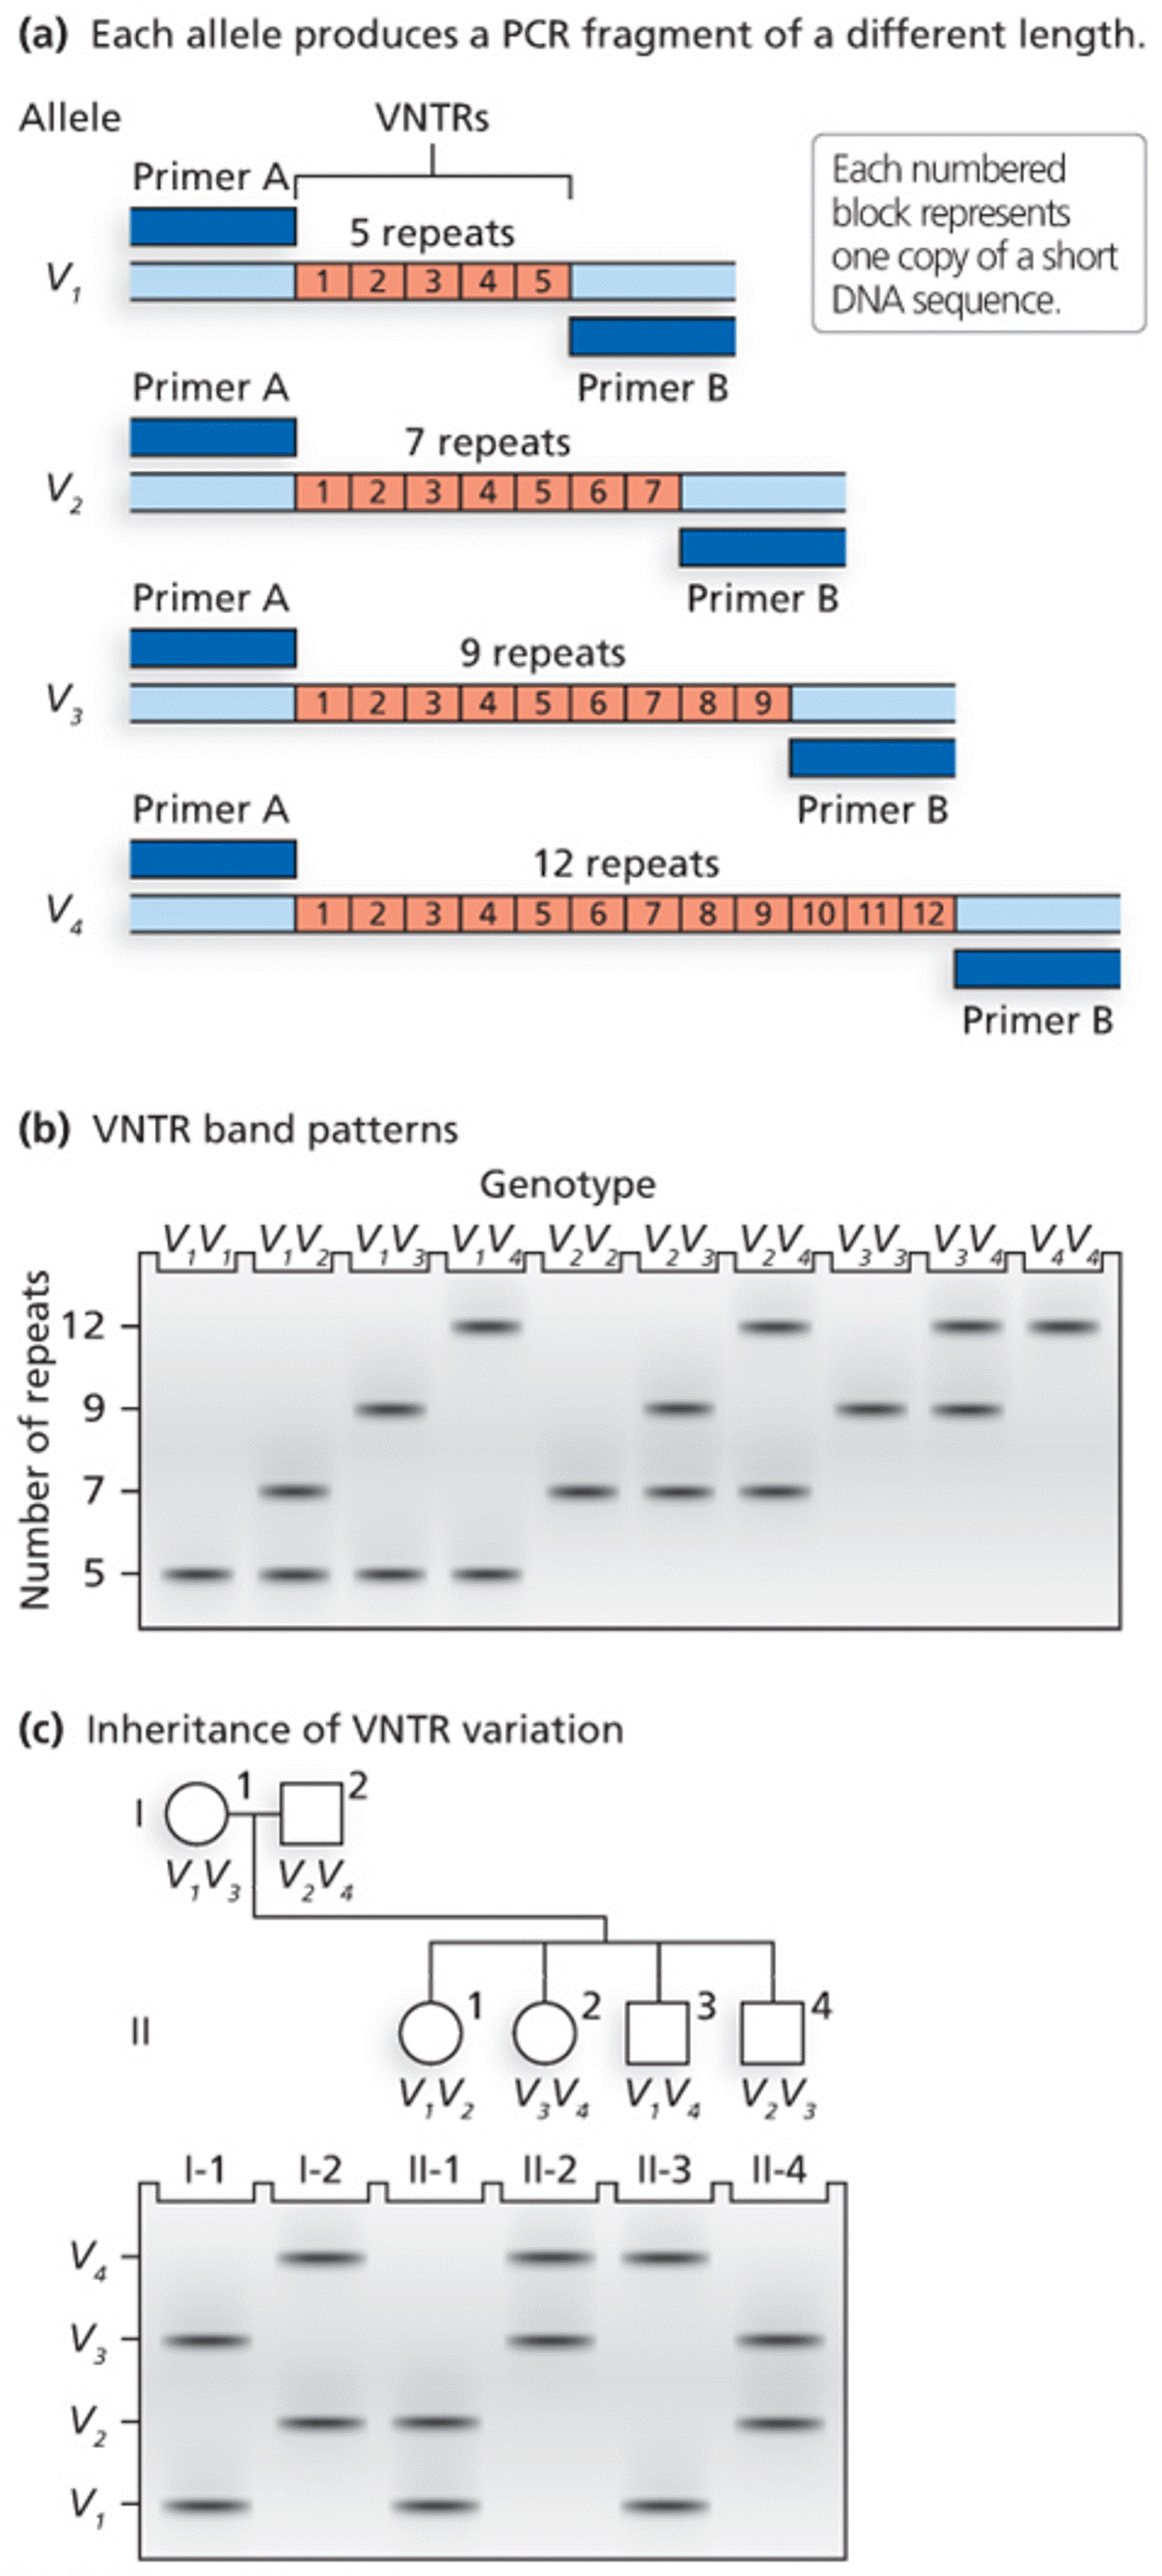 Separation of variable number tandem repeat (VNTR) alleles after PCR amplification